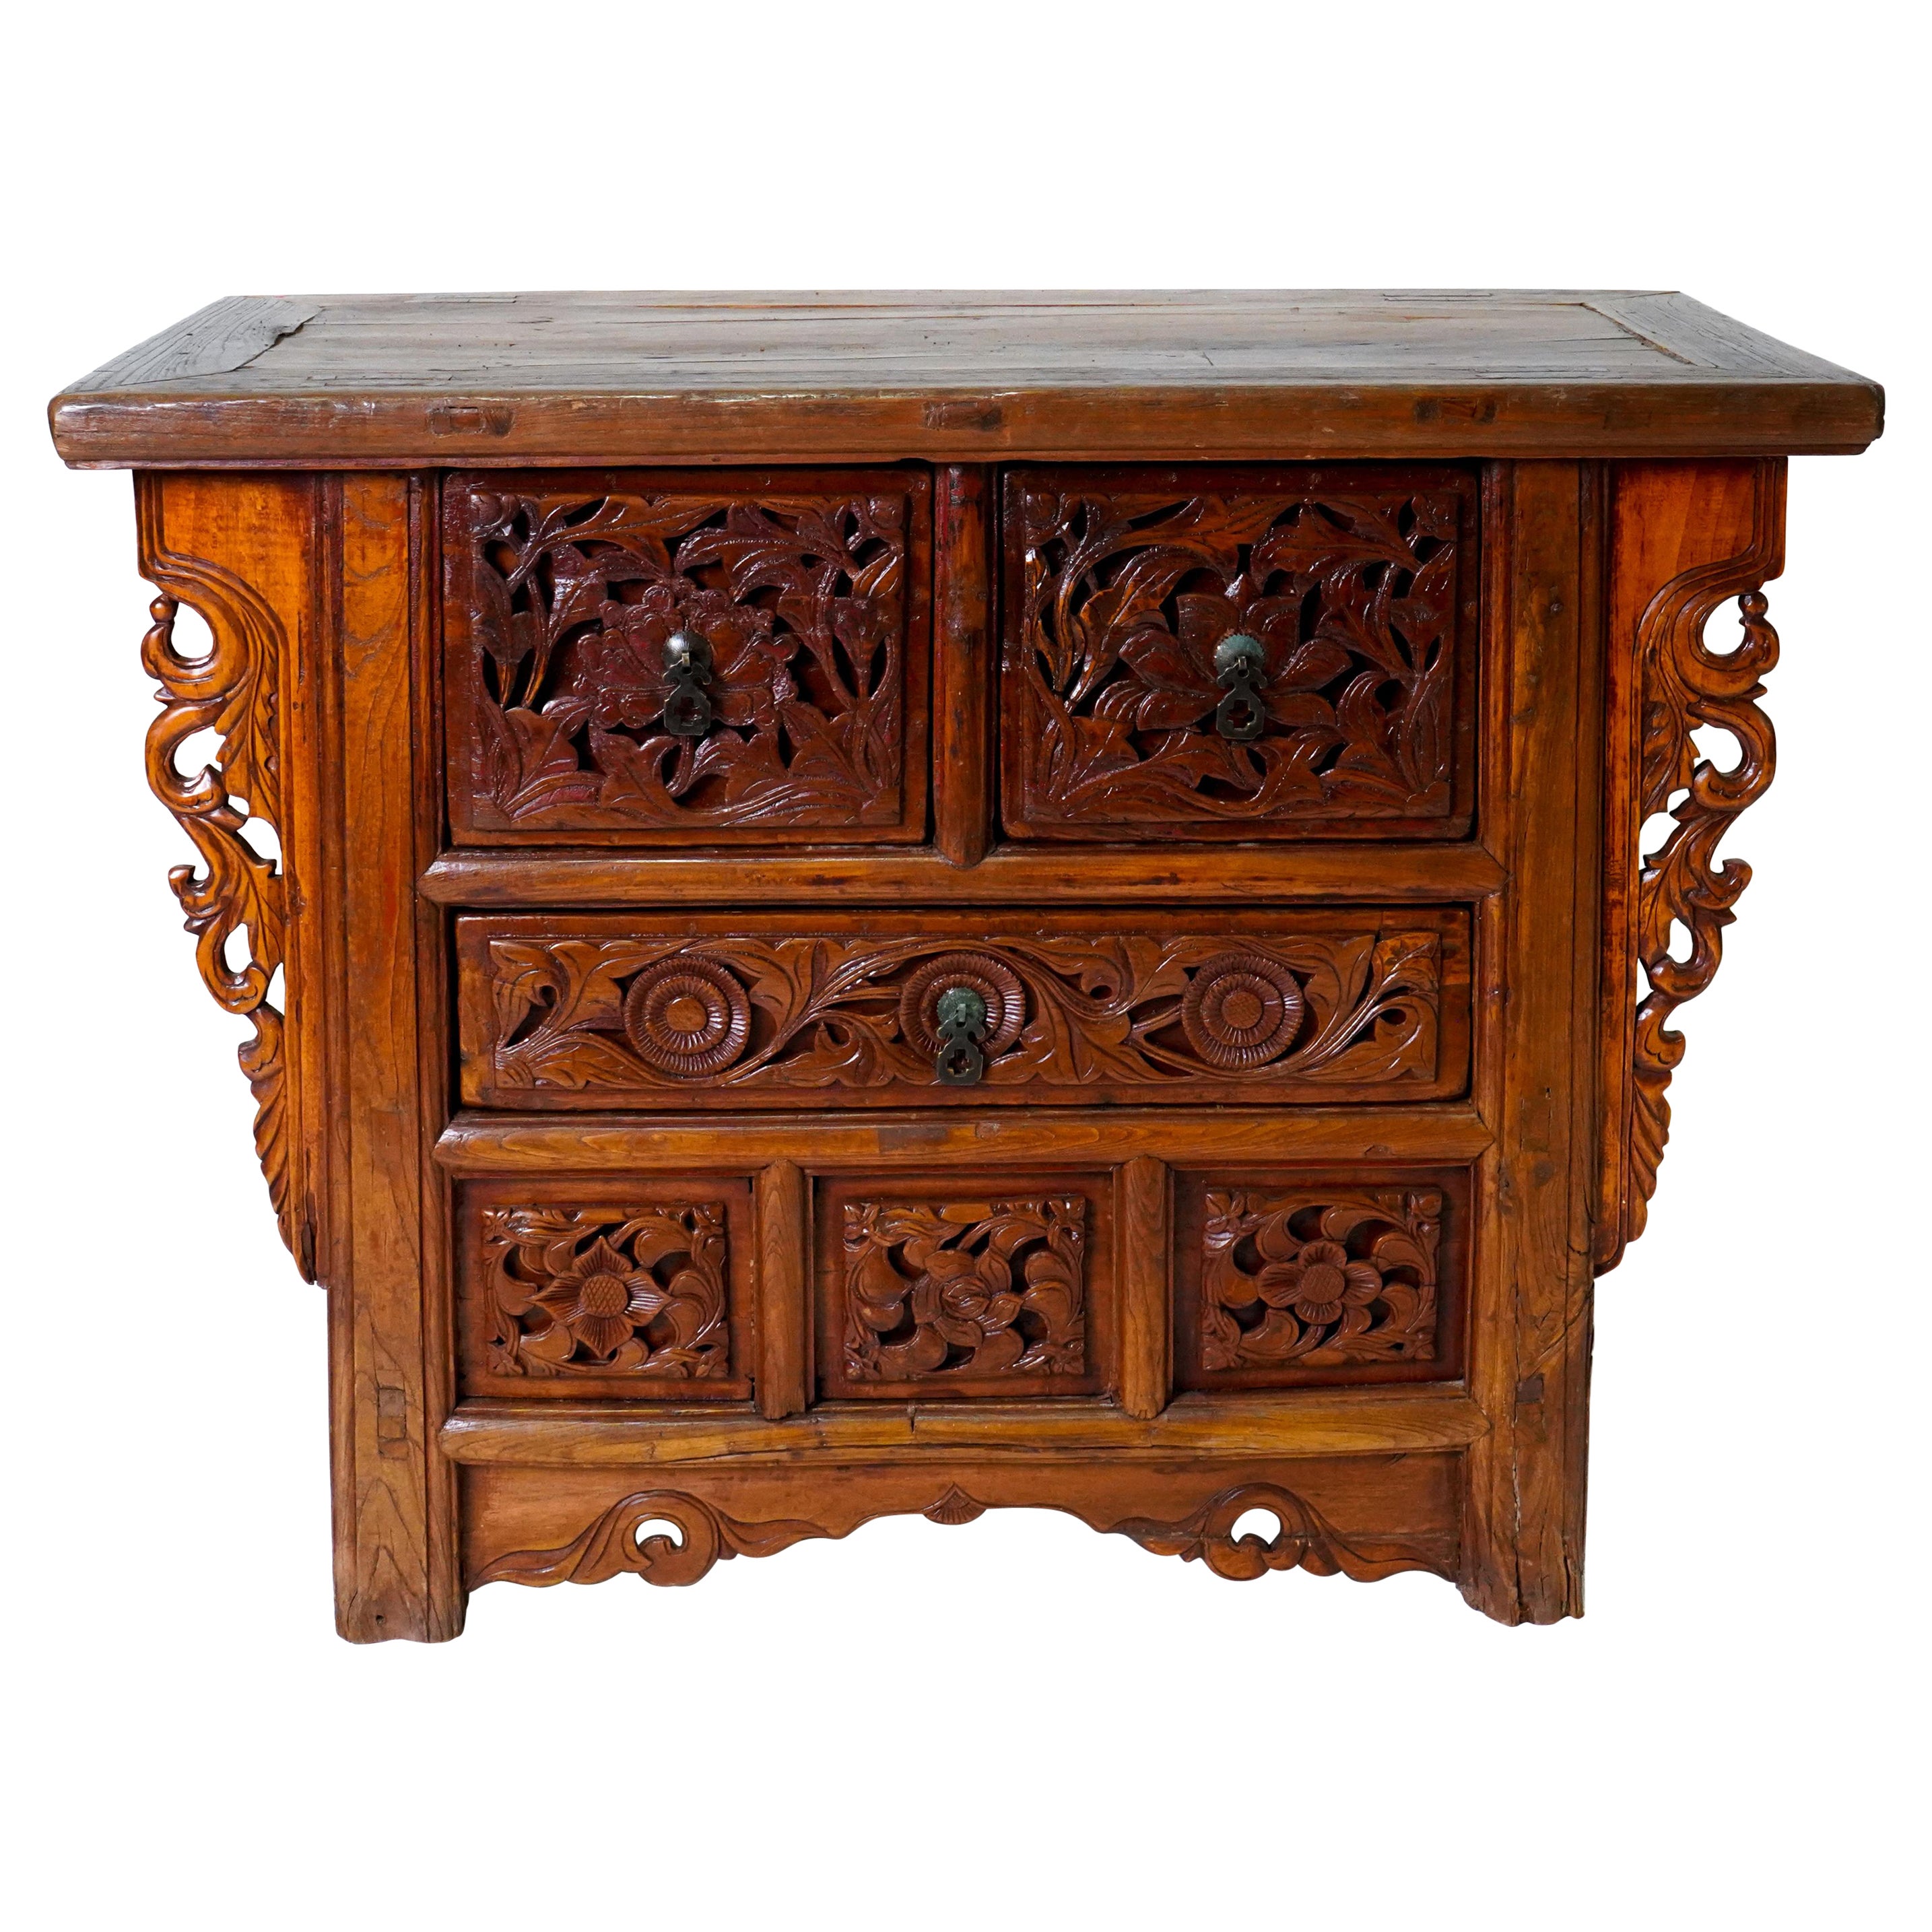 A Butterfly Style Storage Cabinet With Carved Spandrels